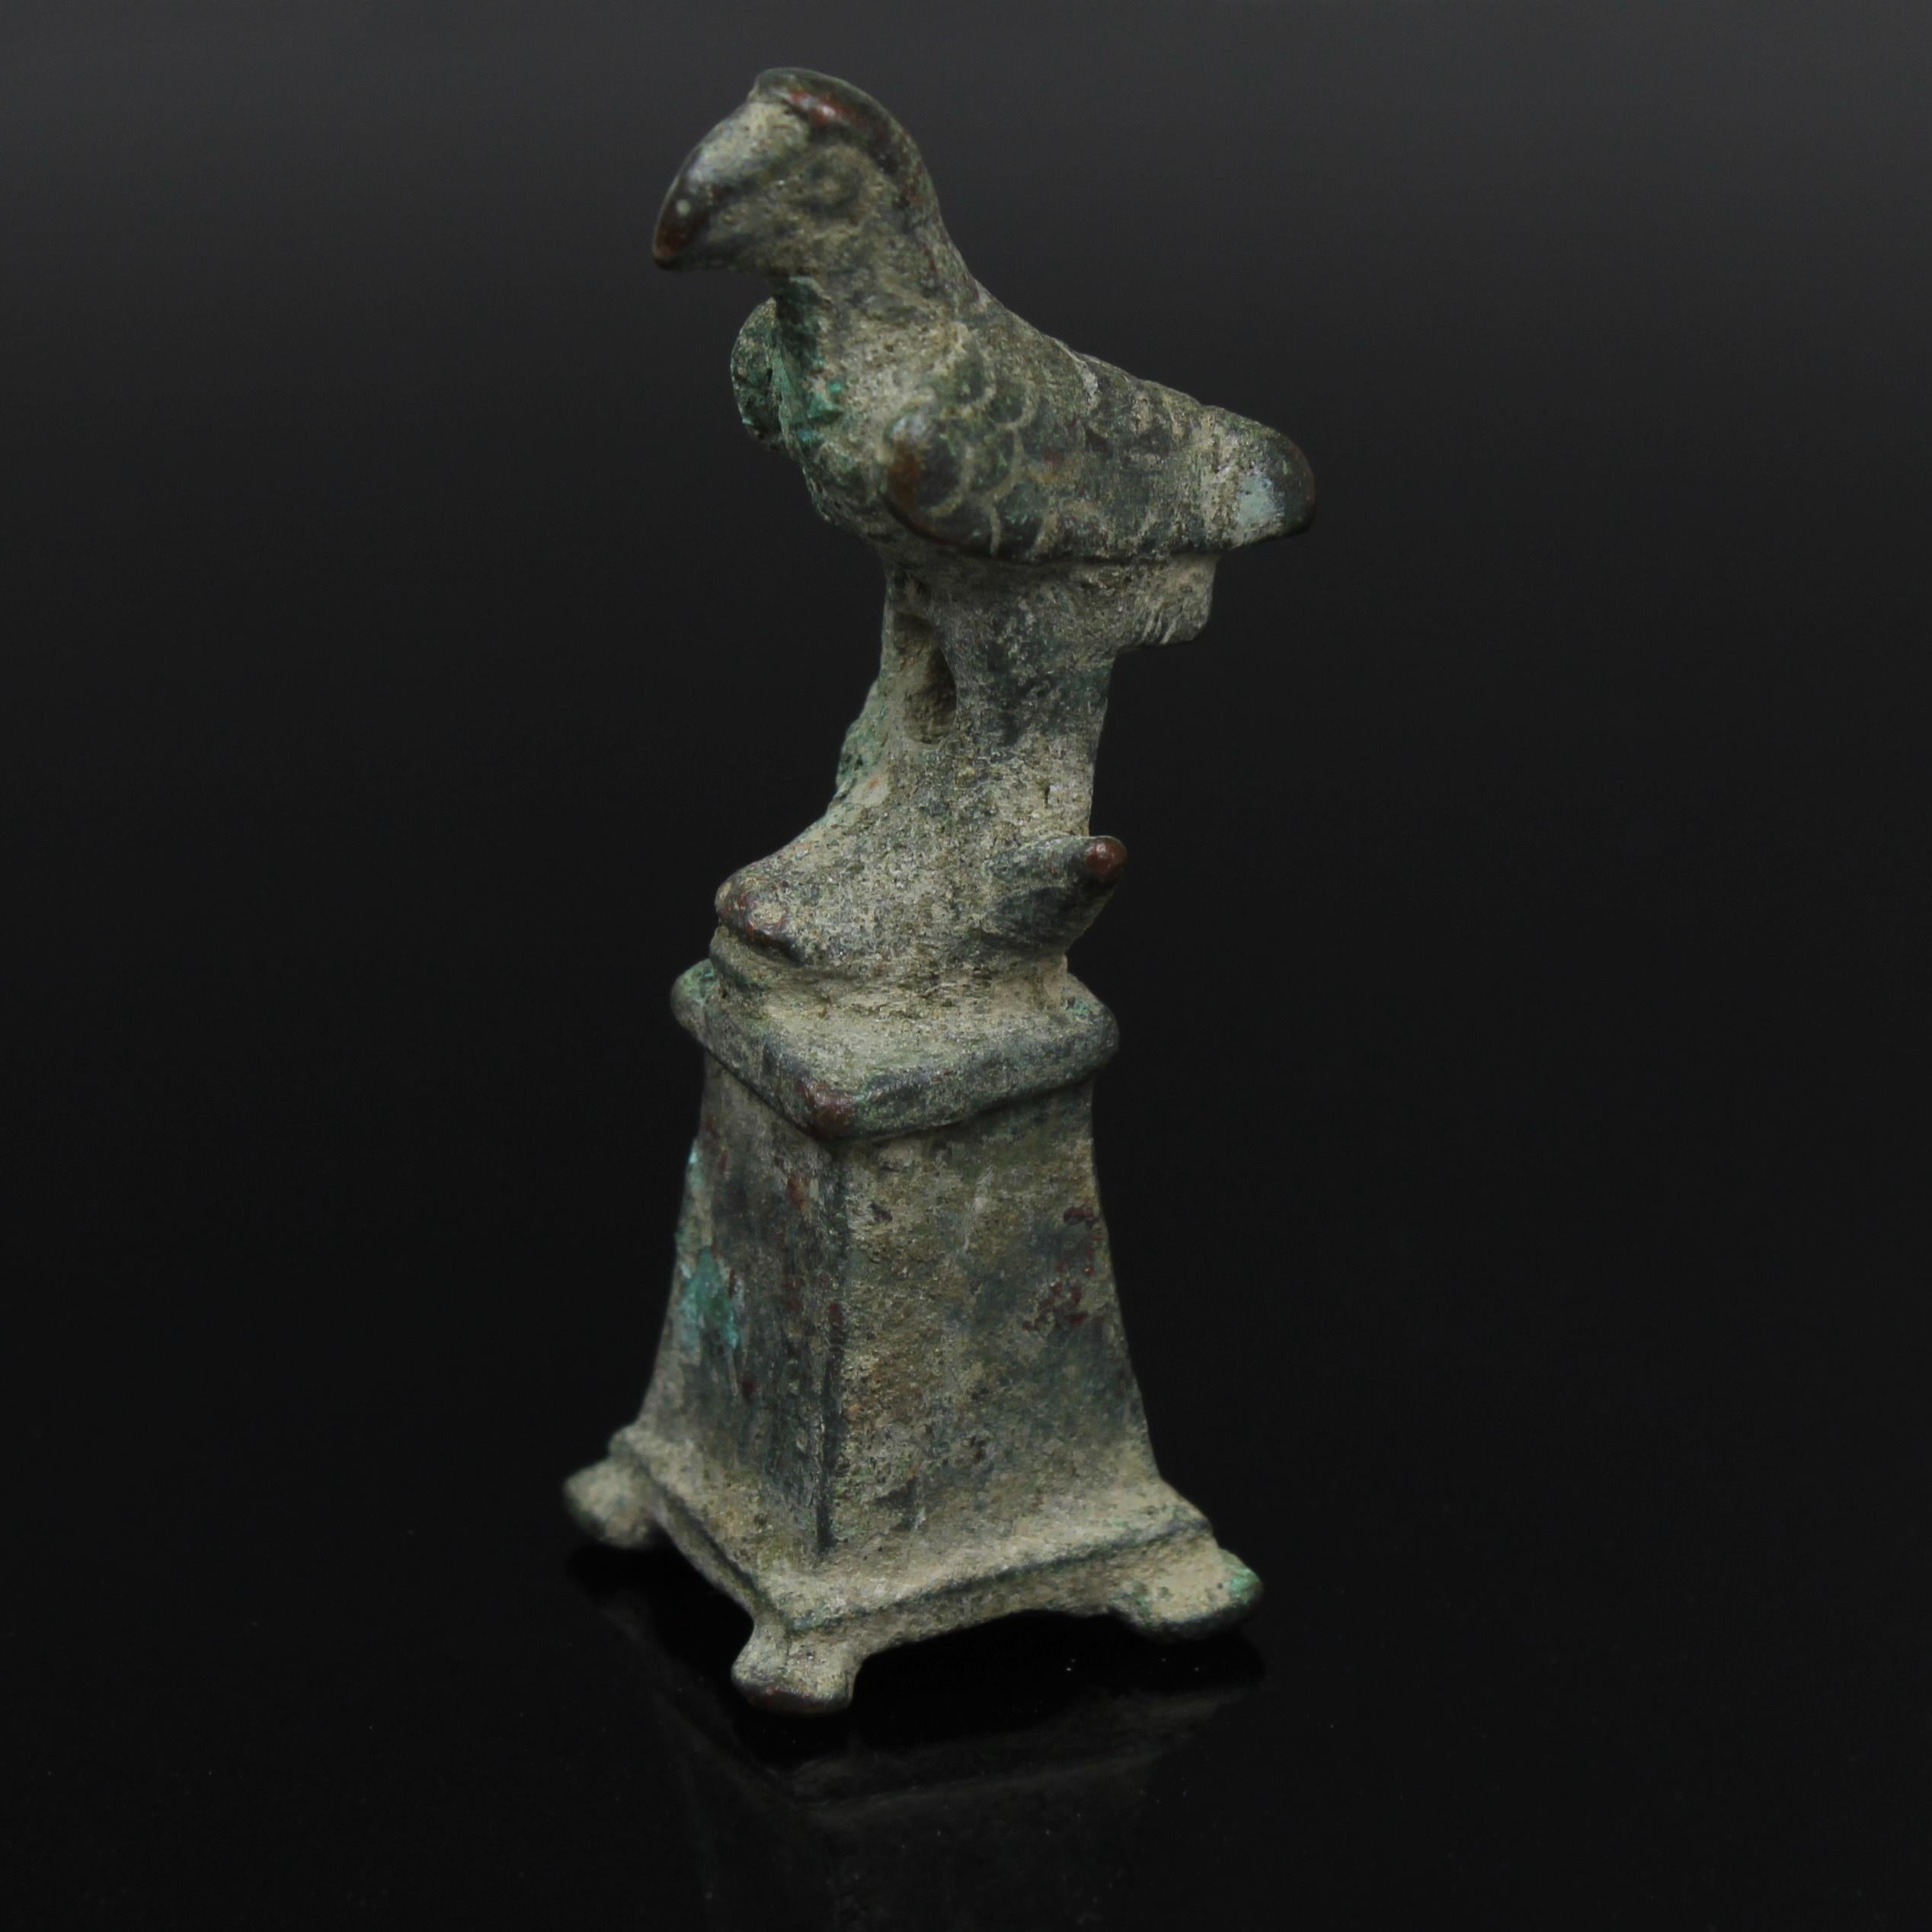 ITEM: Statuette of an eagle on pedestal
MATERIAL: Bronze
CULTURE: Roman
PERIOD: 1st – 3rd Century A.D
DIMENSIONS: 60 mm x 20 mm x 20 mm
CONDITION: Good condition
PROVENANCE: Ex German private collection, acquired before 1980s

Comes with Certificate